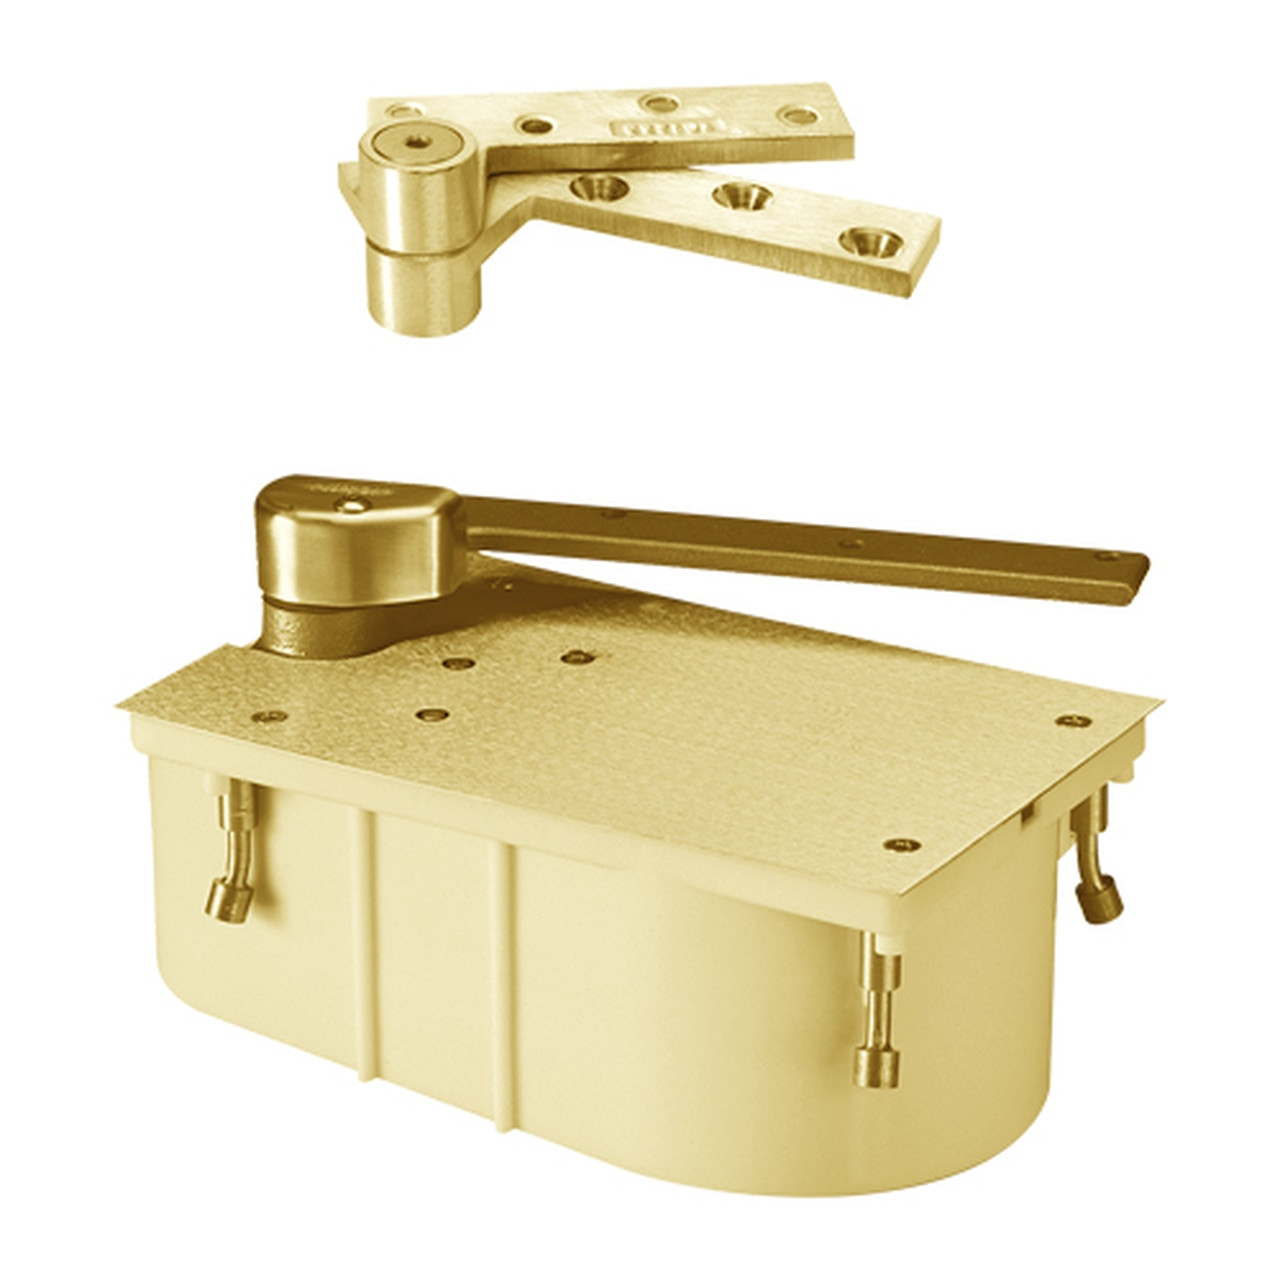 F27-90N-1-1-2OS-LTP-RH-605 Rixson 27 Series Fire Rated Heavy Duty 1-1/2" Offset Hung Floor Closer in Bright Brass Finish